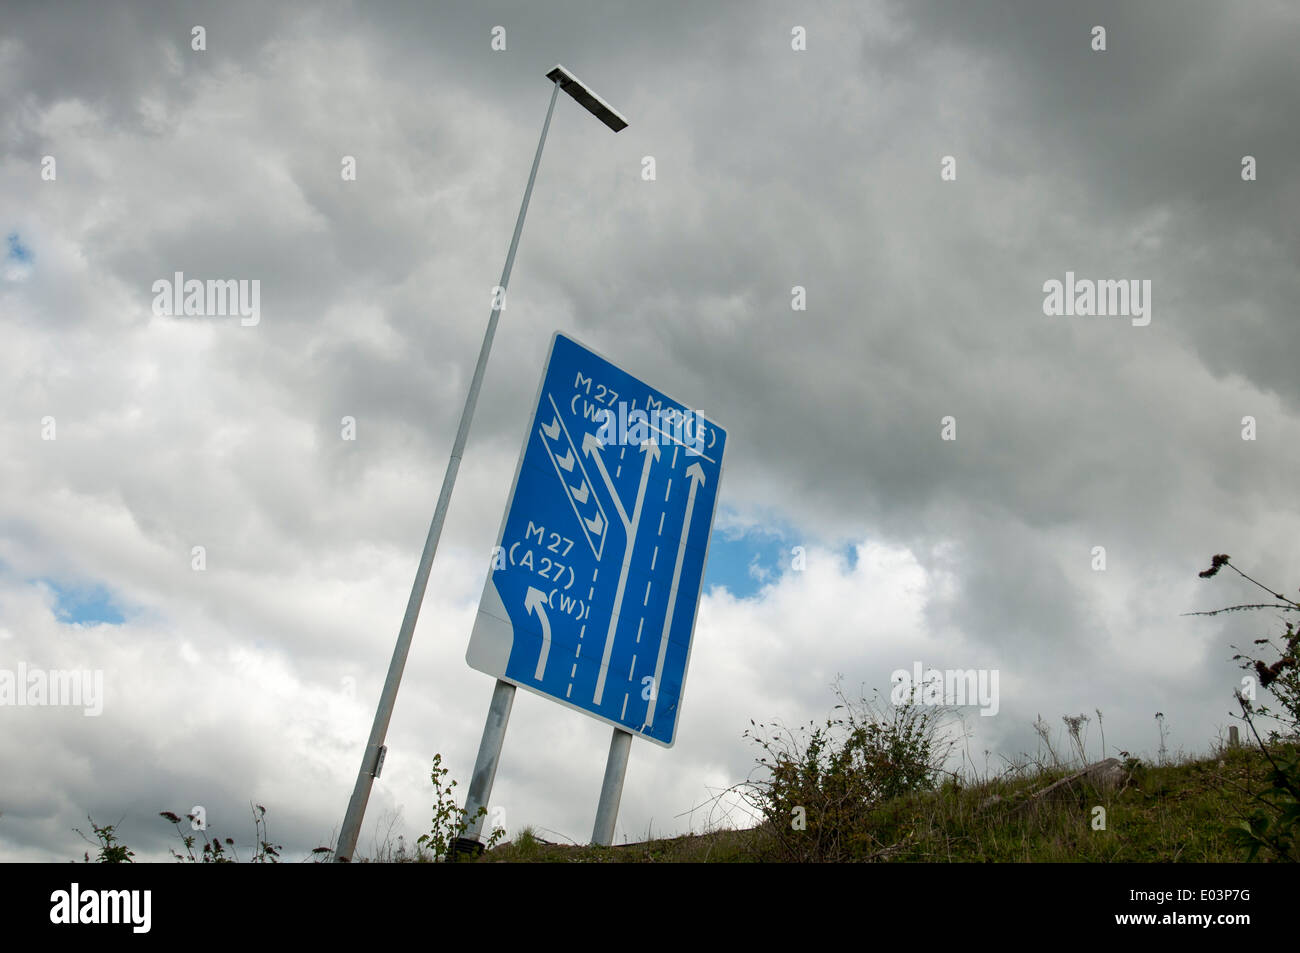 M27 Motorway sign with lane directions Stock Photo